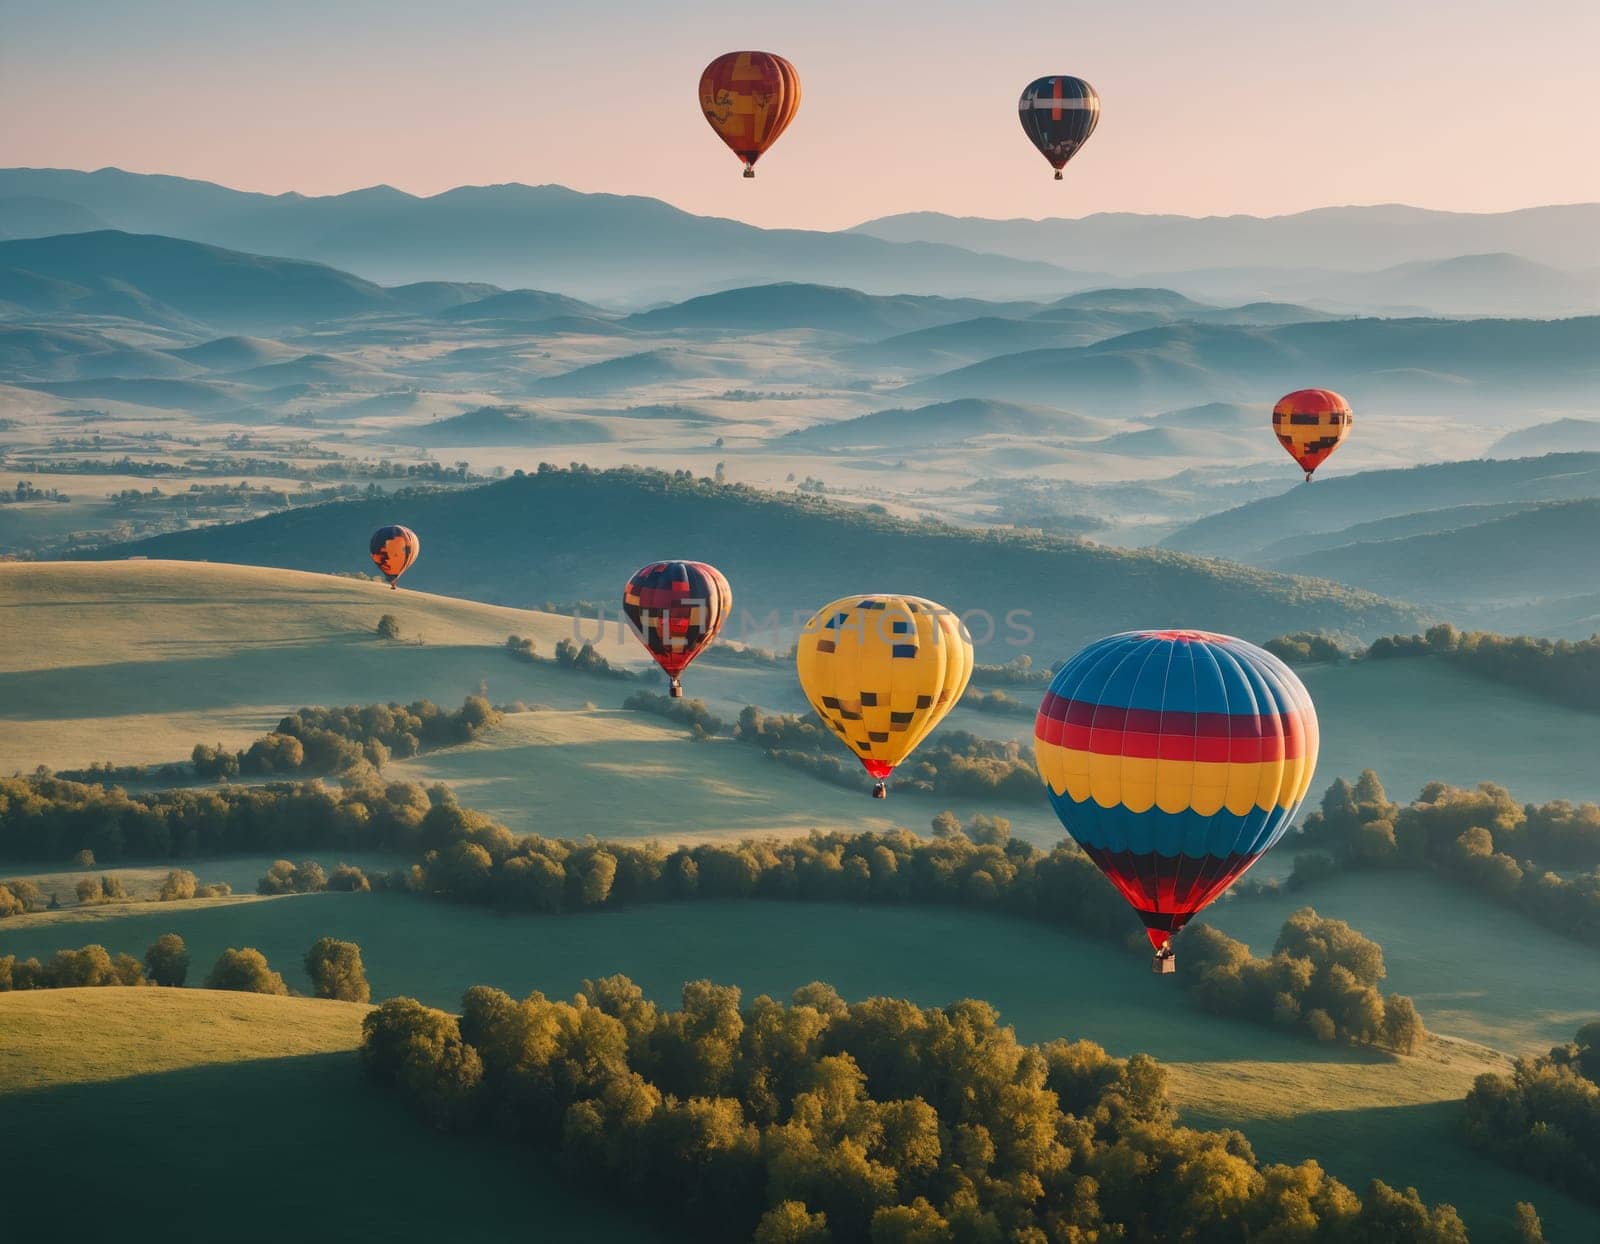 Spectacular views of colorful hot air balloons floating above the scenic landscape during golden hour. The image captures the essence of freedom and adventure.